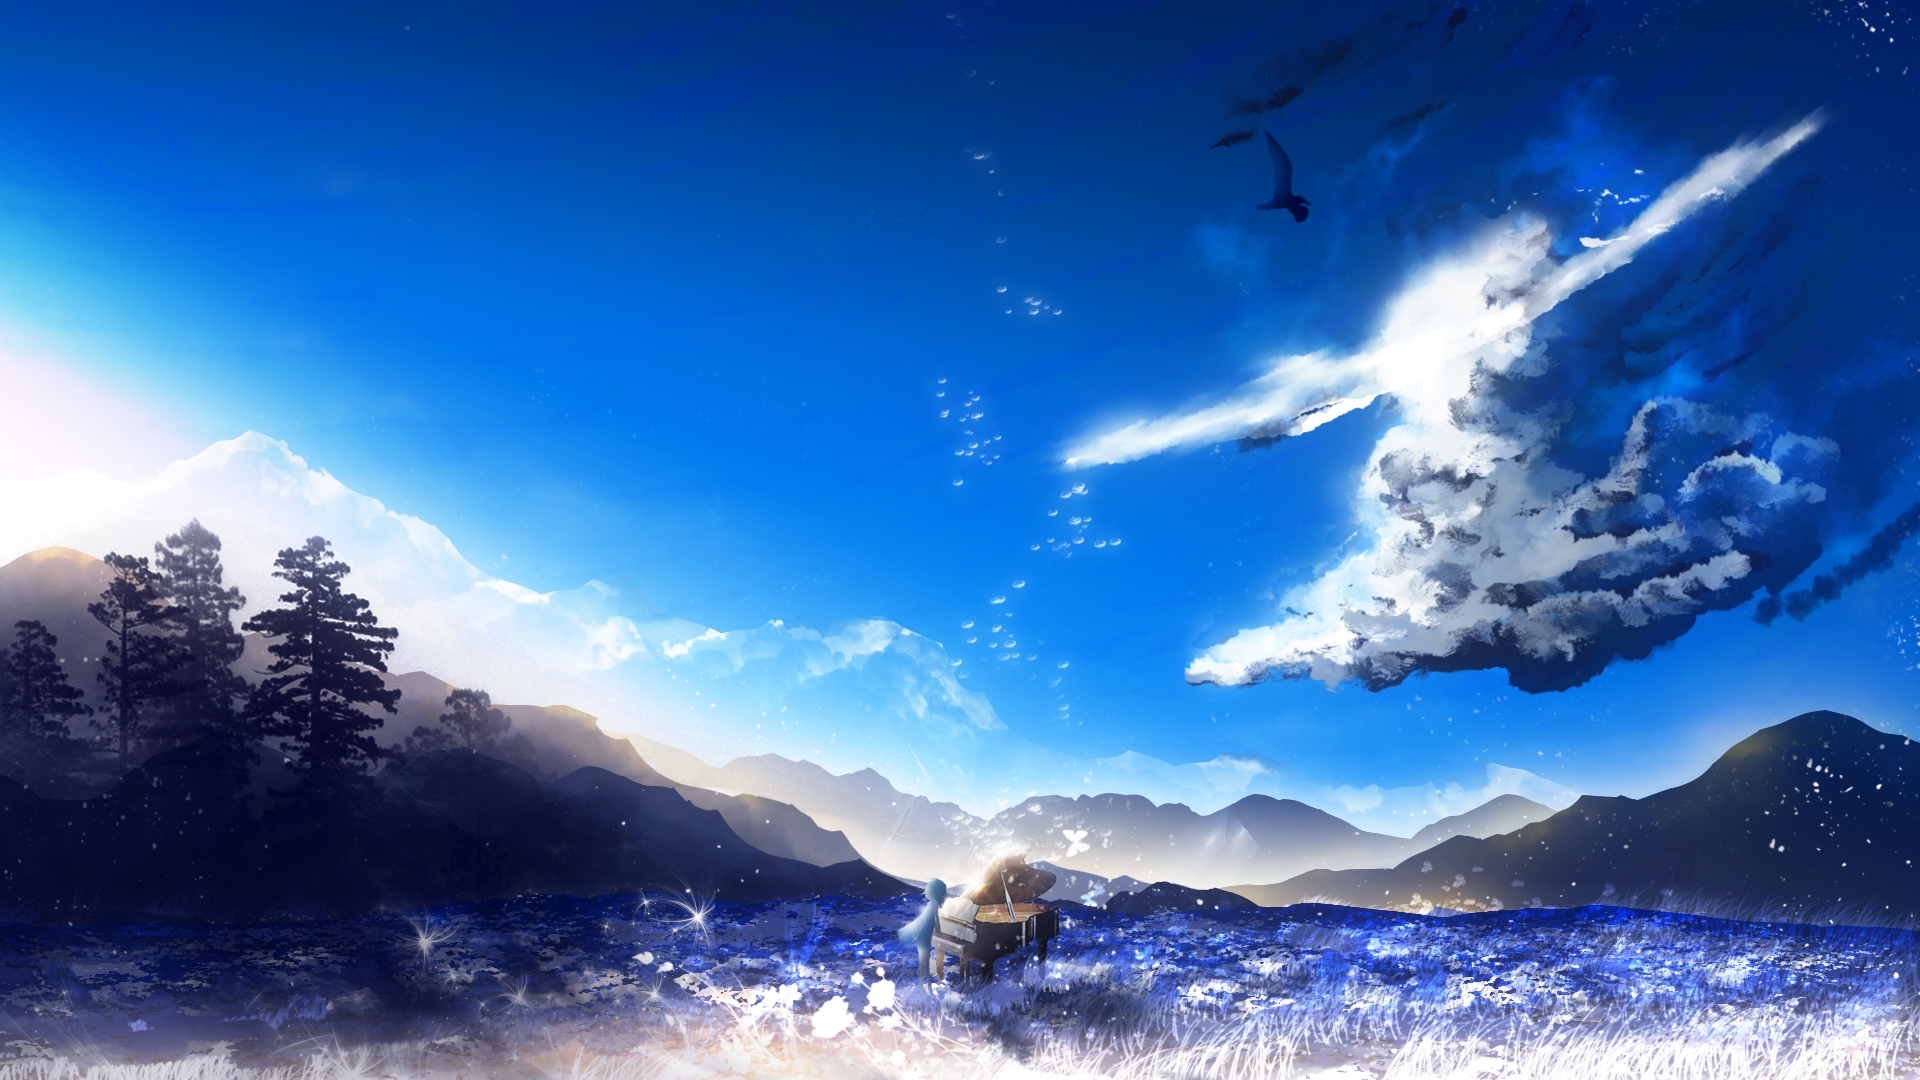 Download 1920x1080 Anime Landscape, Anime Girl, Playing